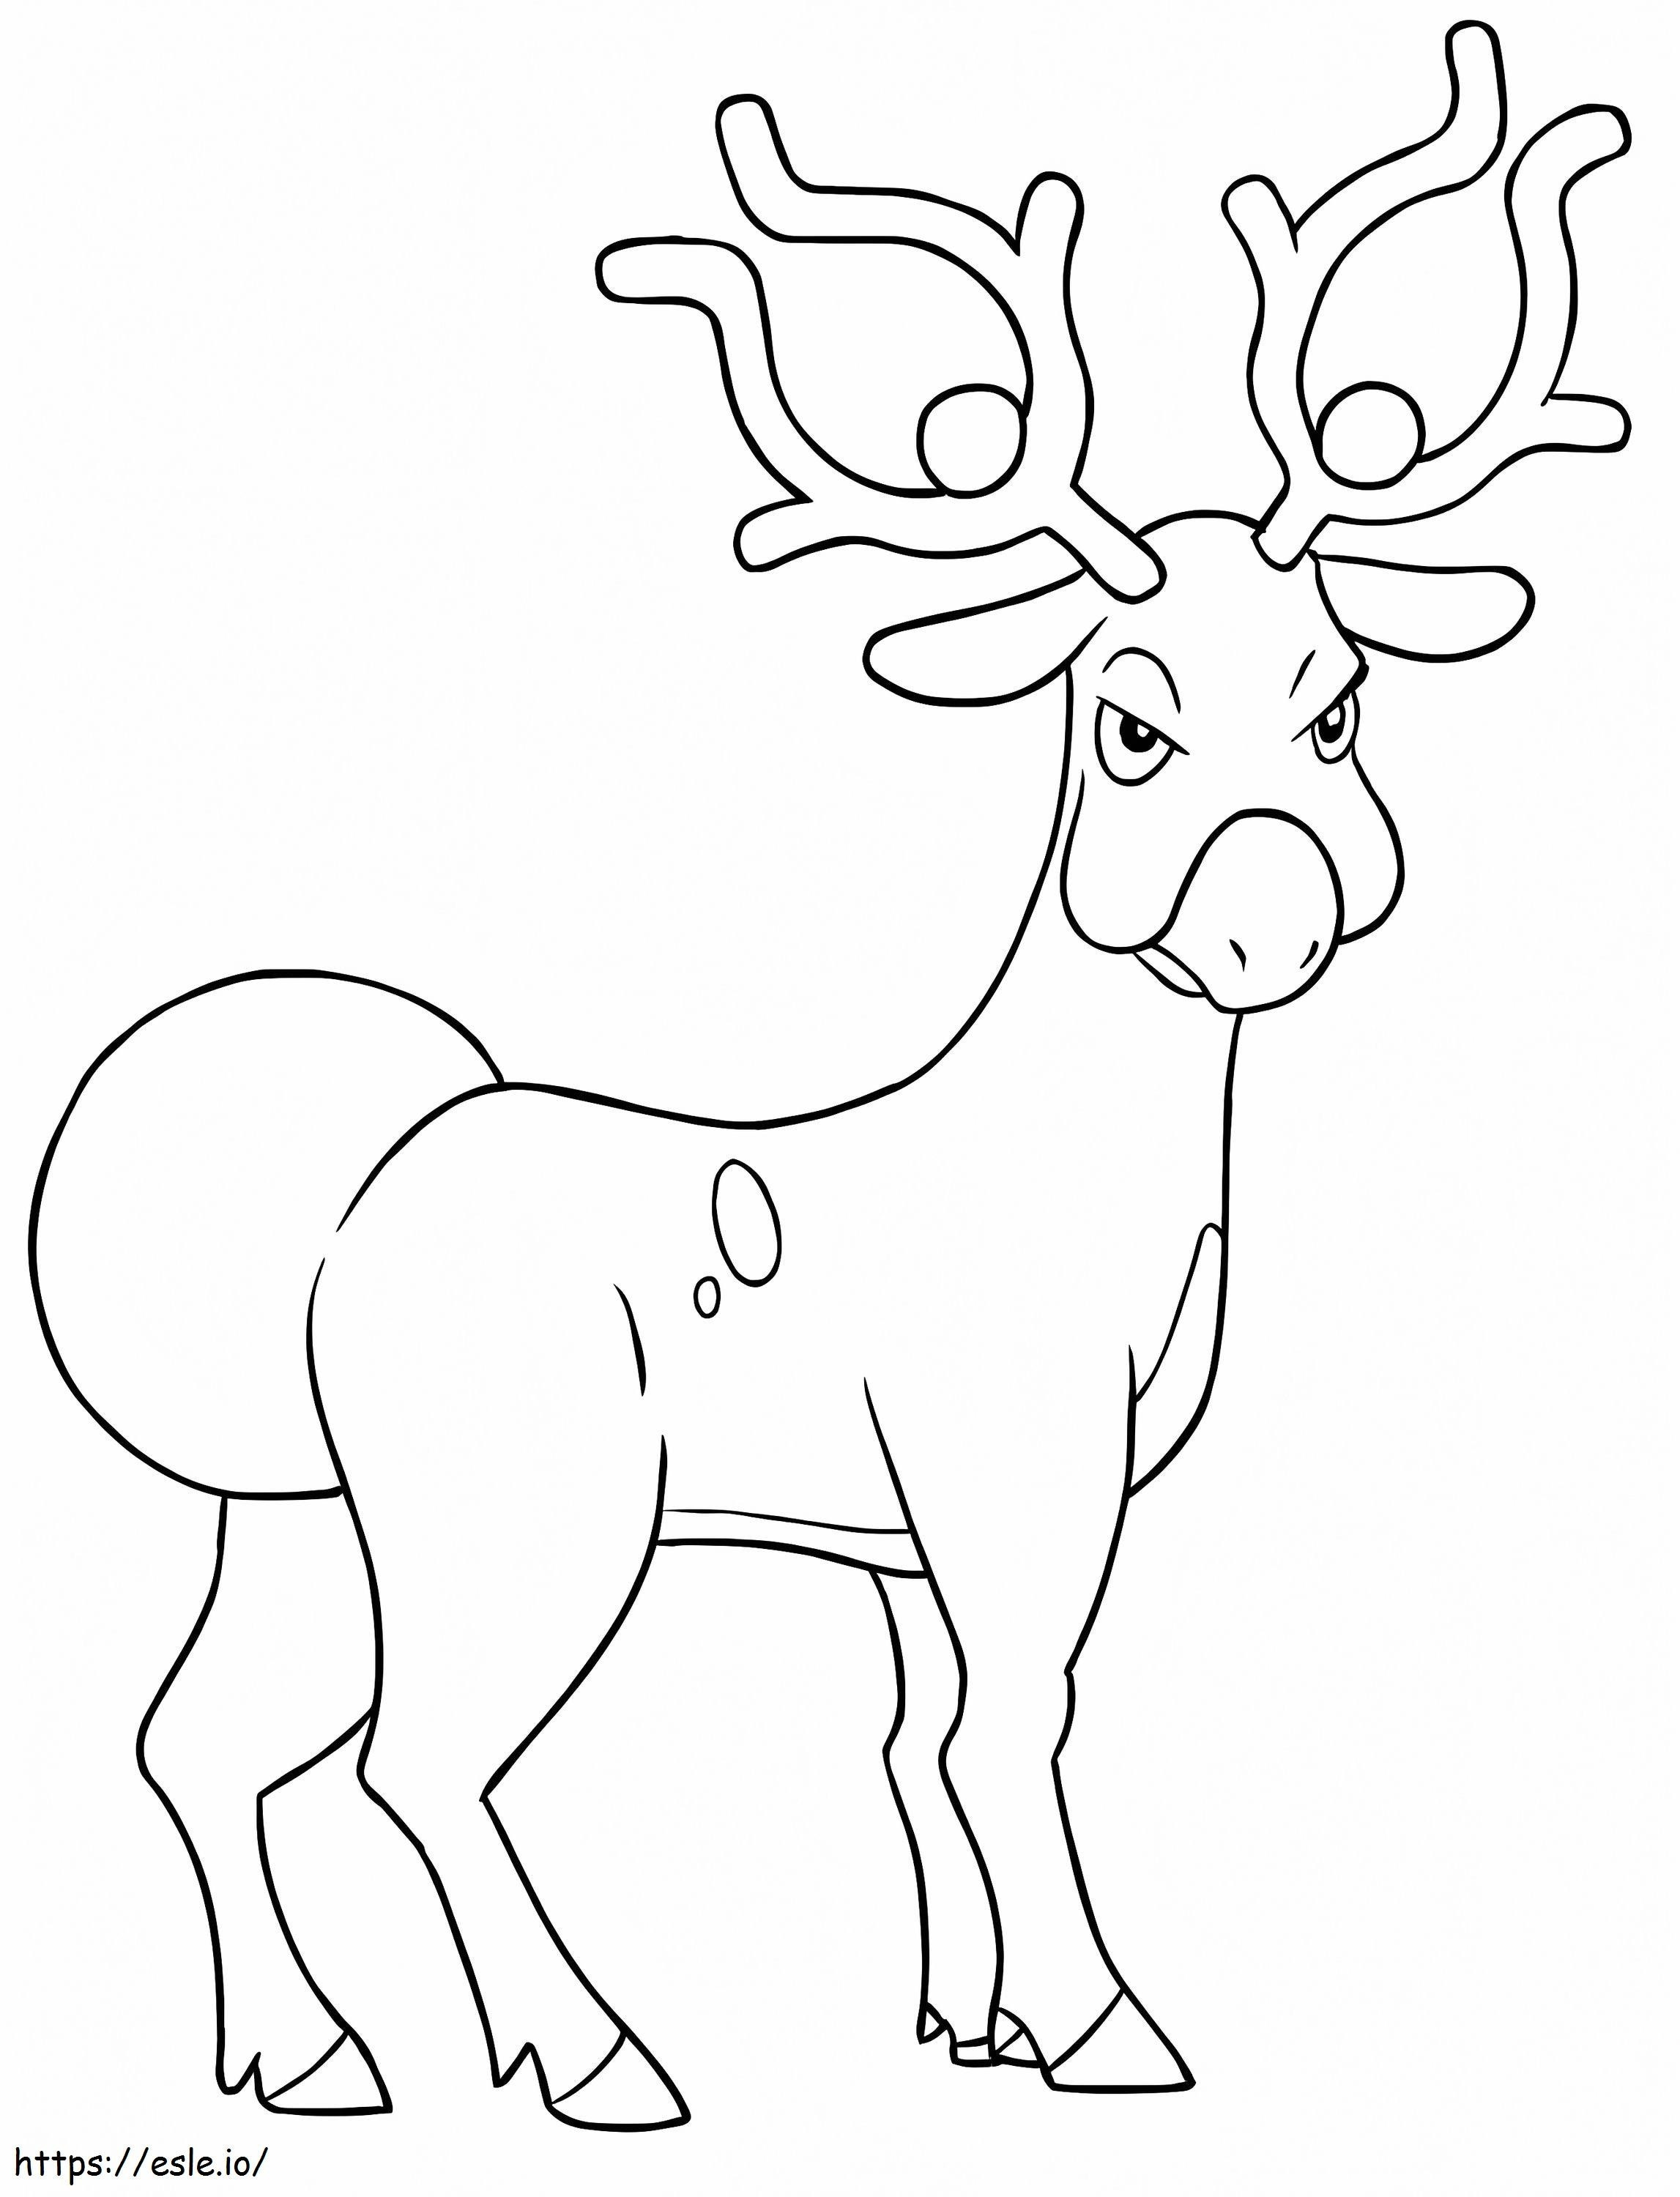 Pokemon Stantler coloring page